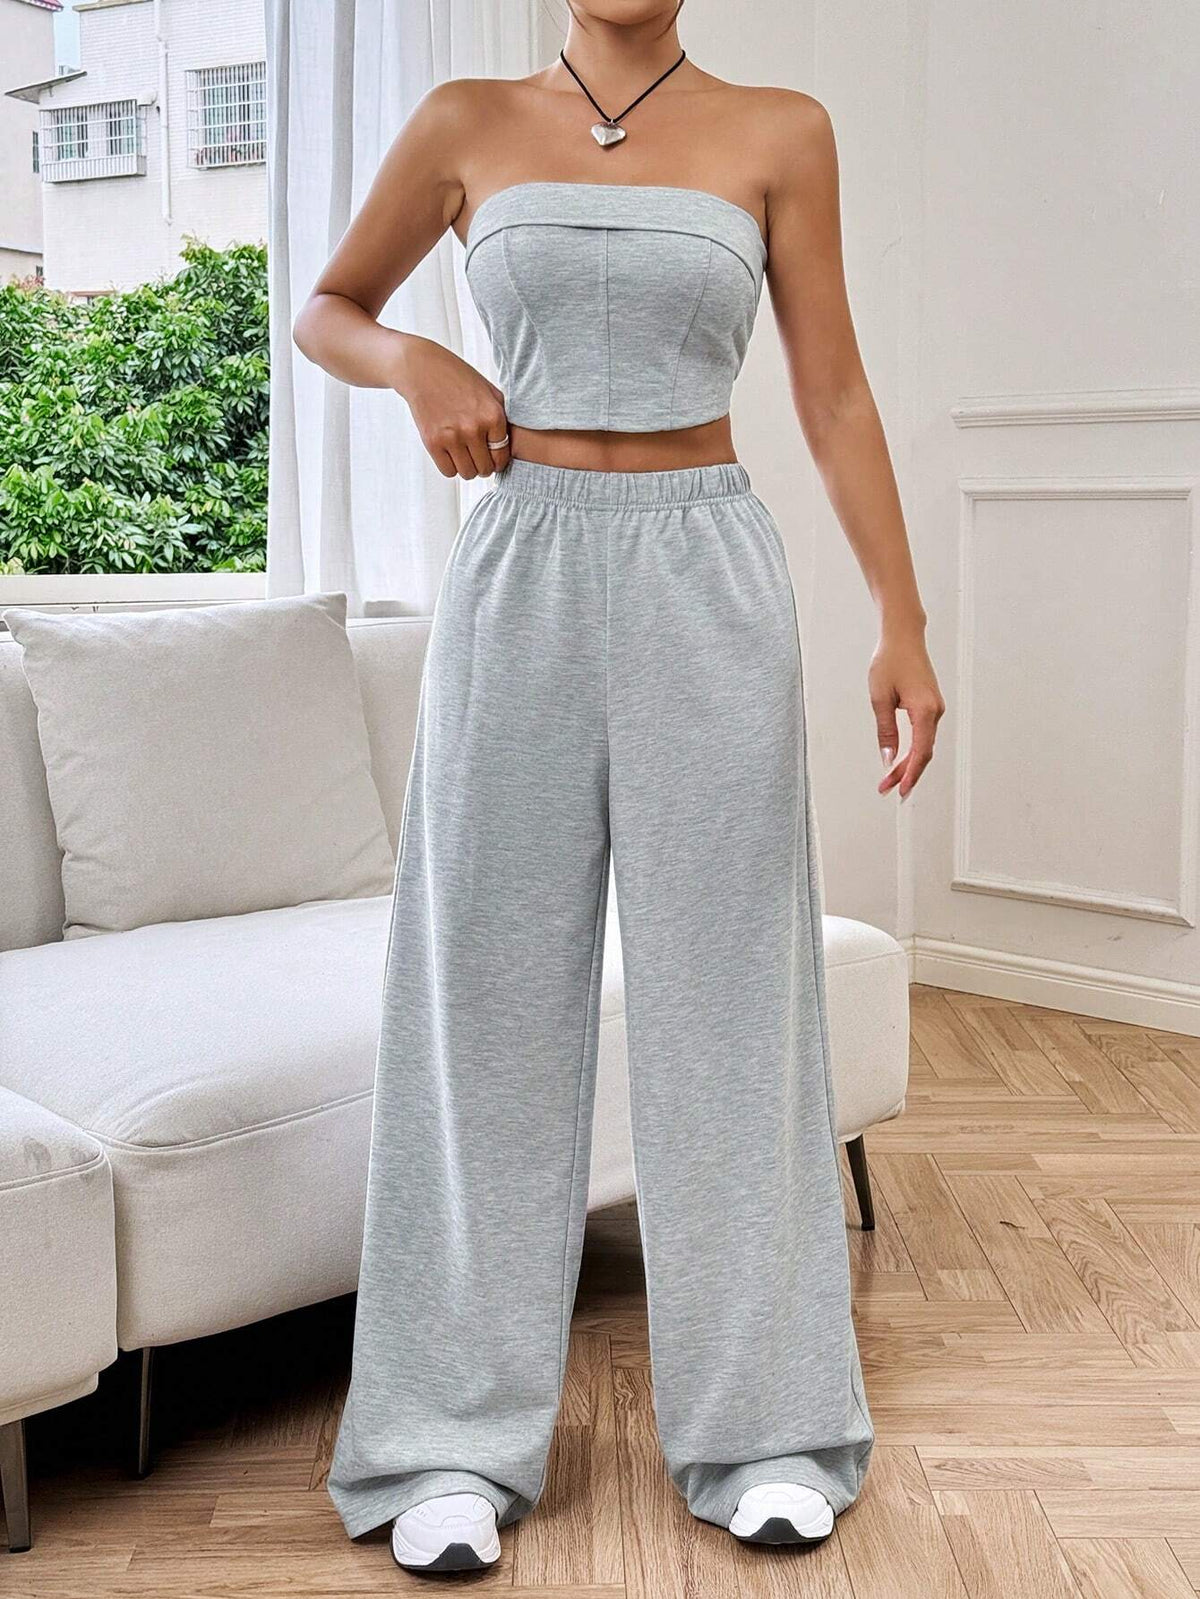 Women's Stylish Casual Fold-Over Bandeau Top And Wide Leg Pants Set